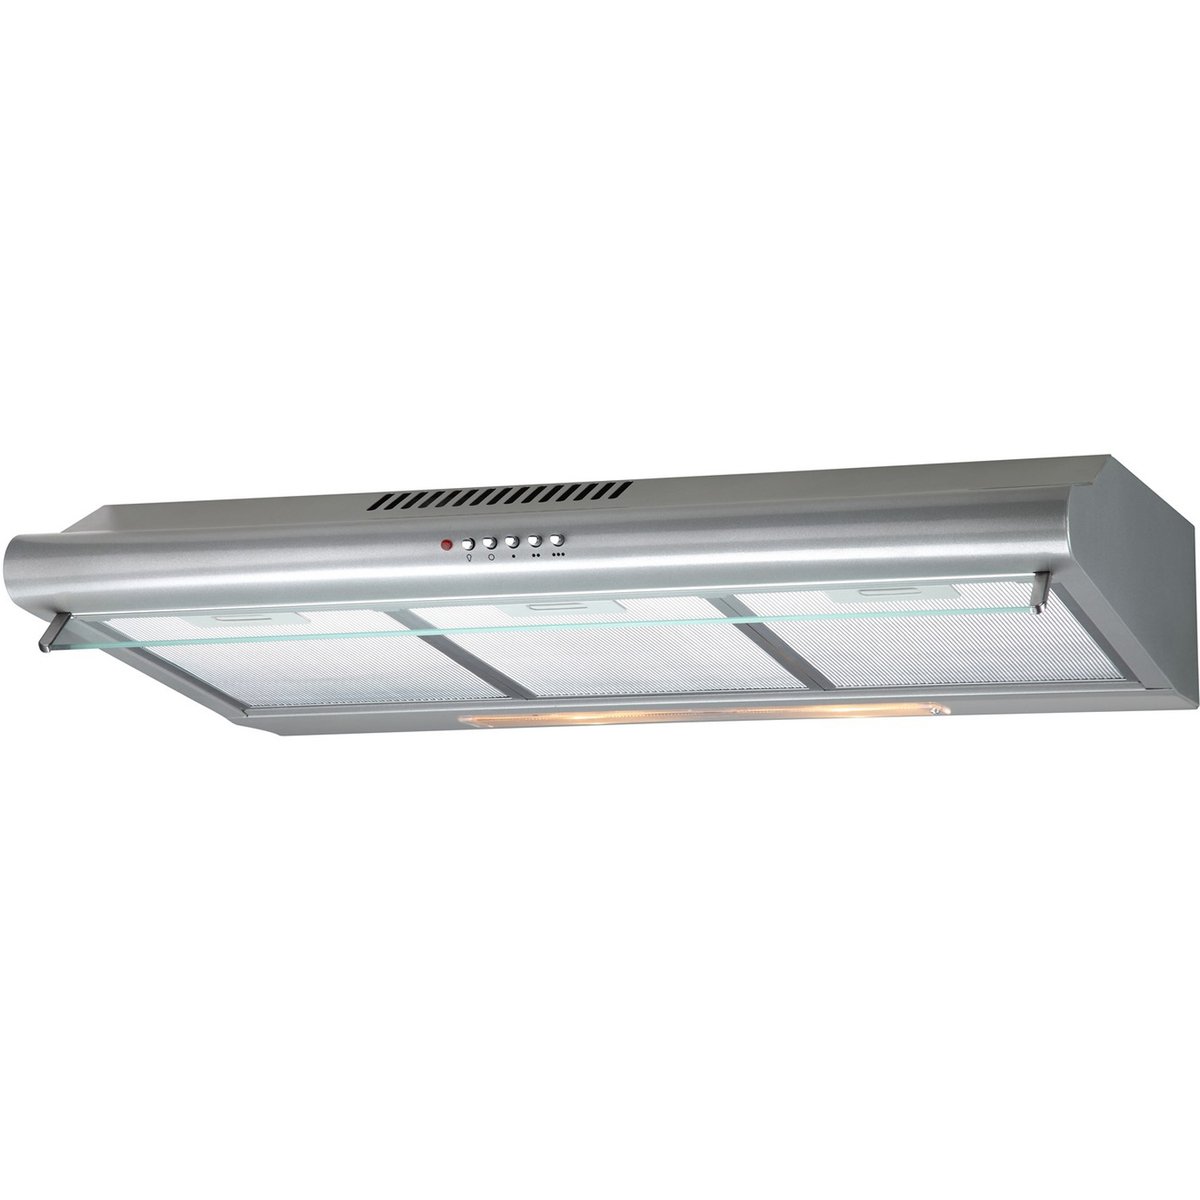 Fagor Conventional Cooker Hood, 90 cm, Stainless Steel, AF3907XA